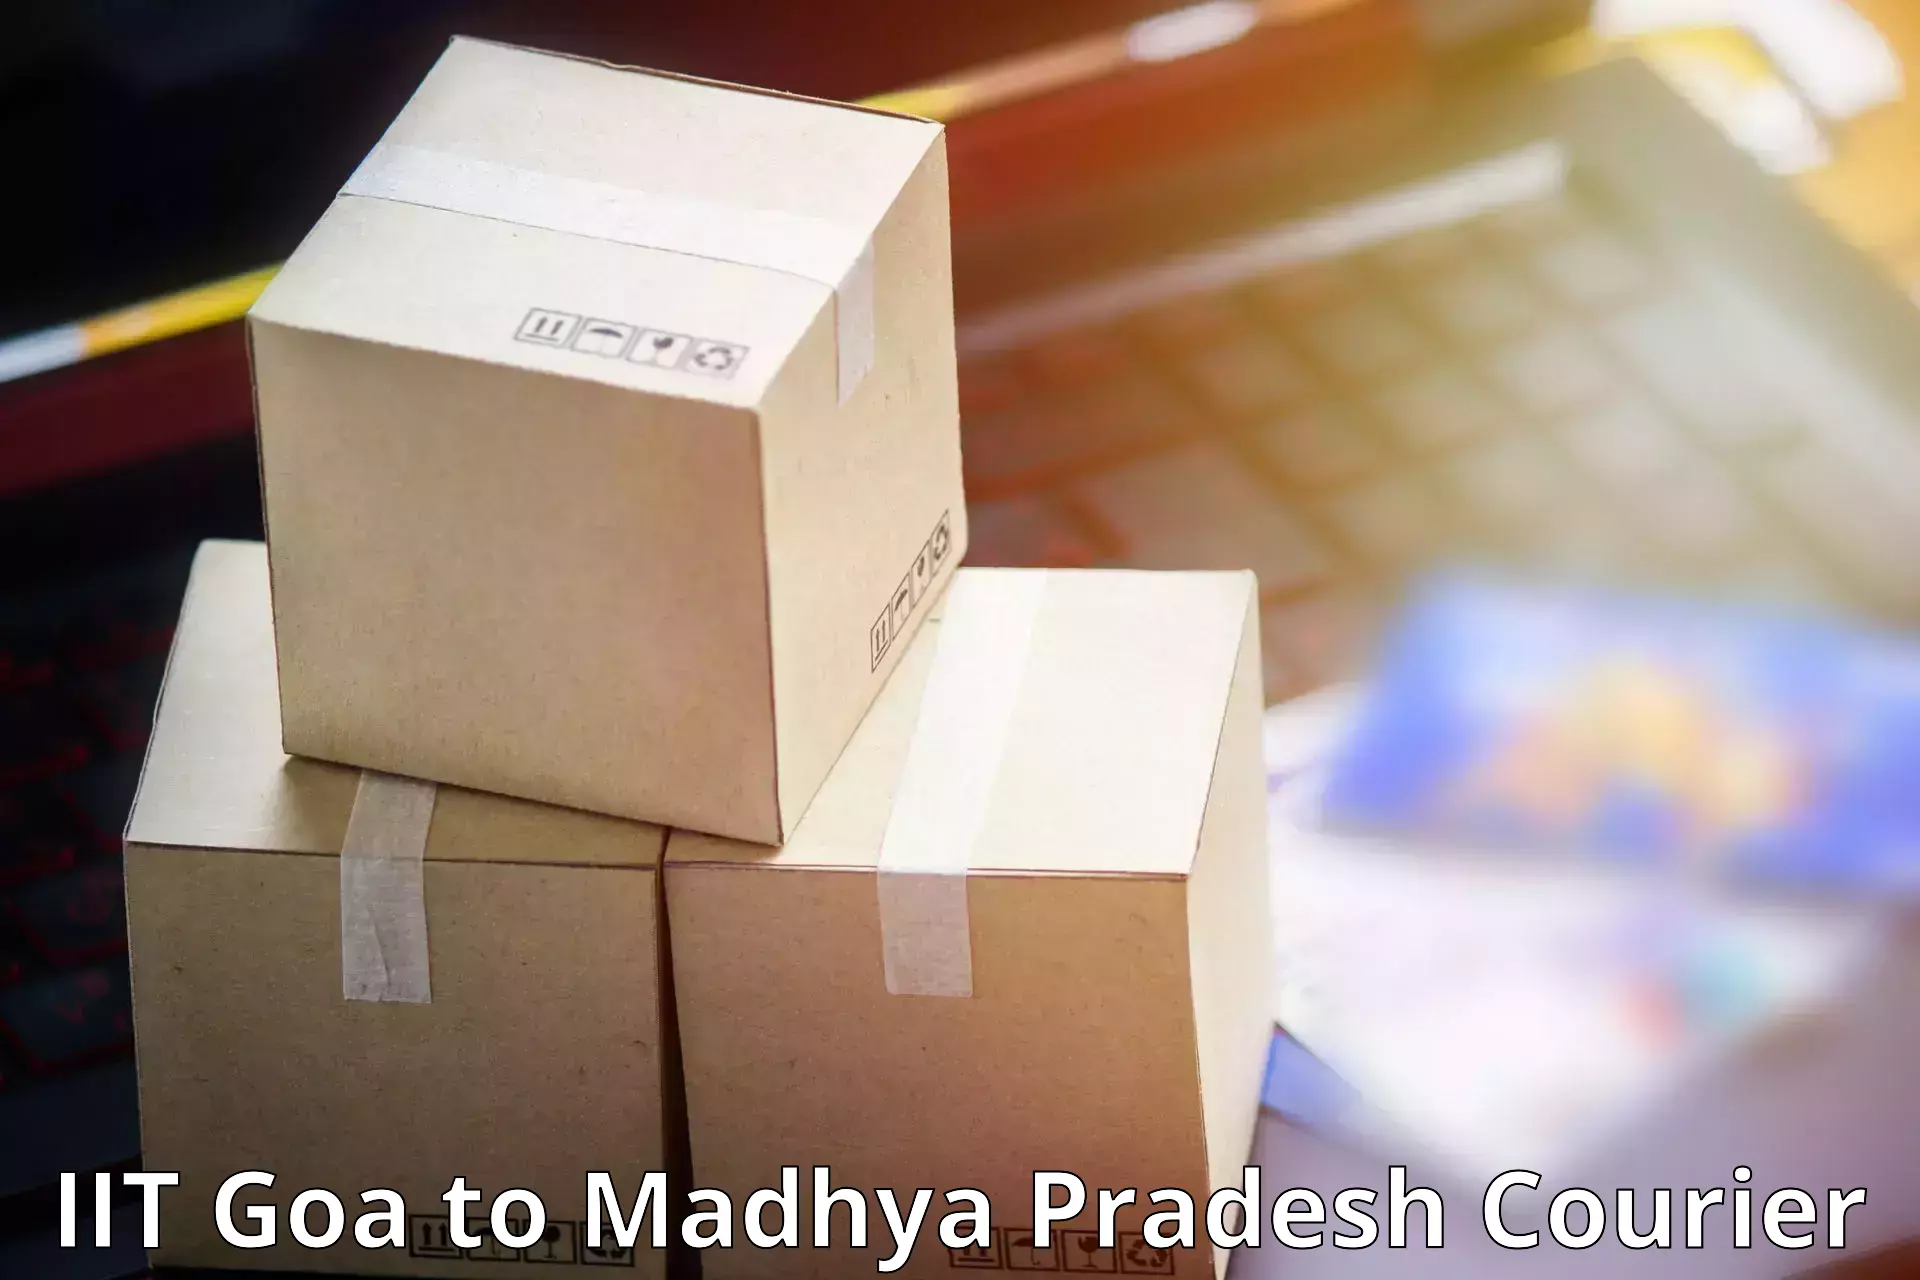 Package delivery network IIT Goa to Lahar